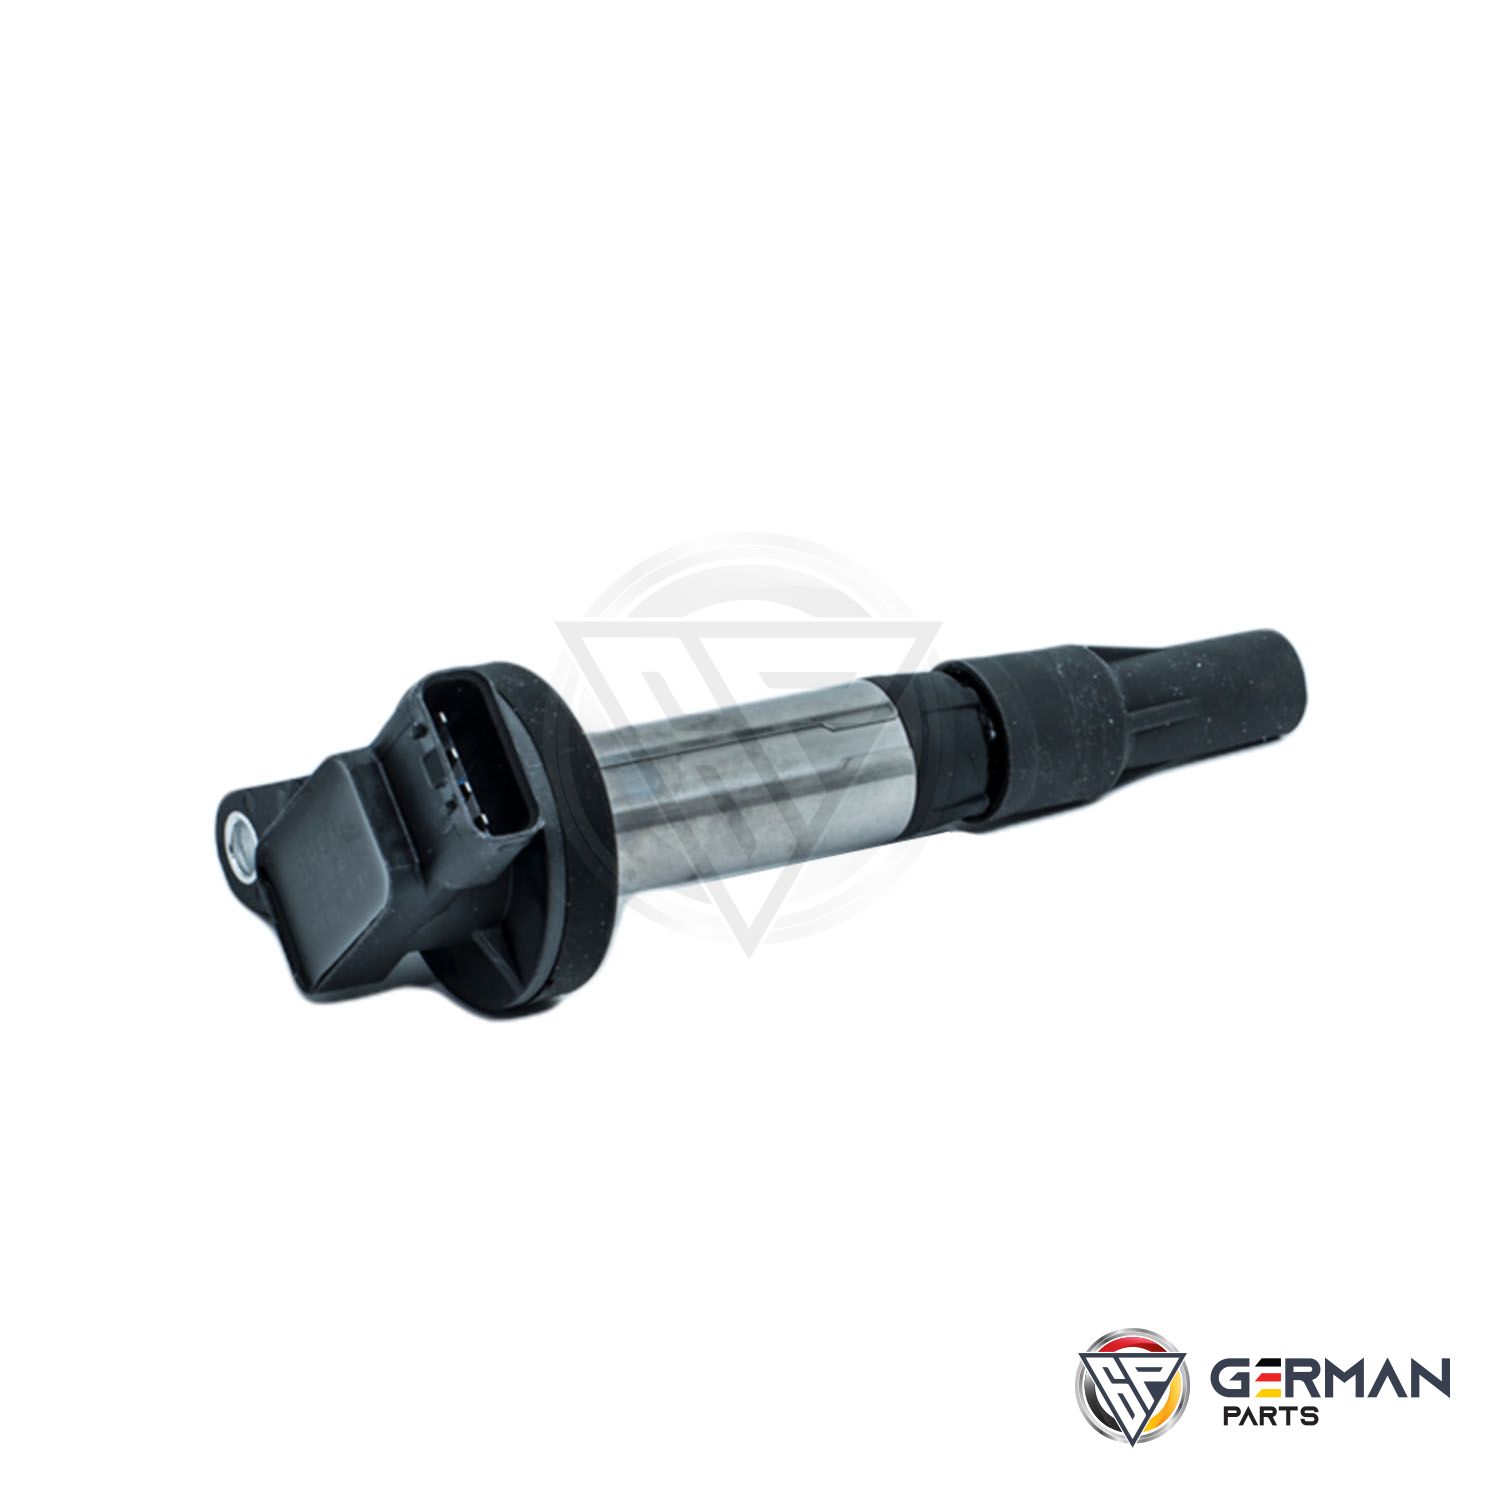 Buy Bremi Ignition Coil 4744015 - German Parts